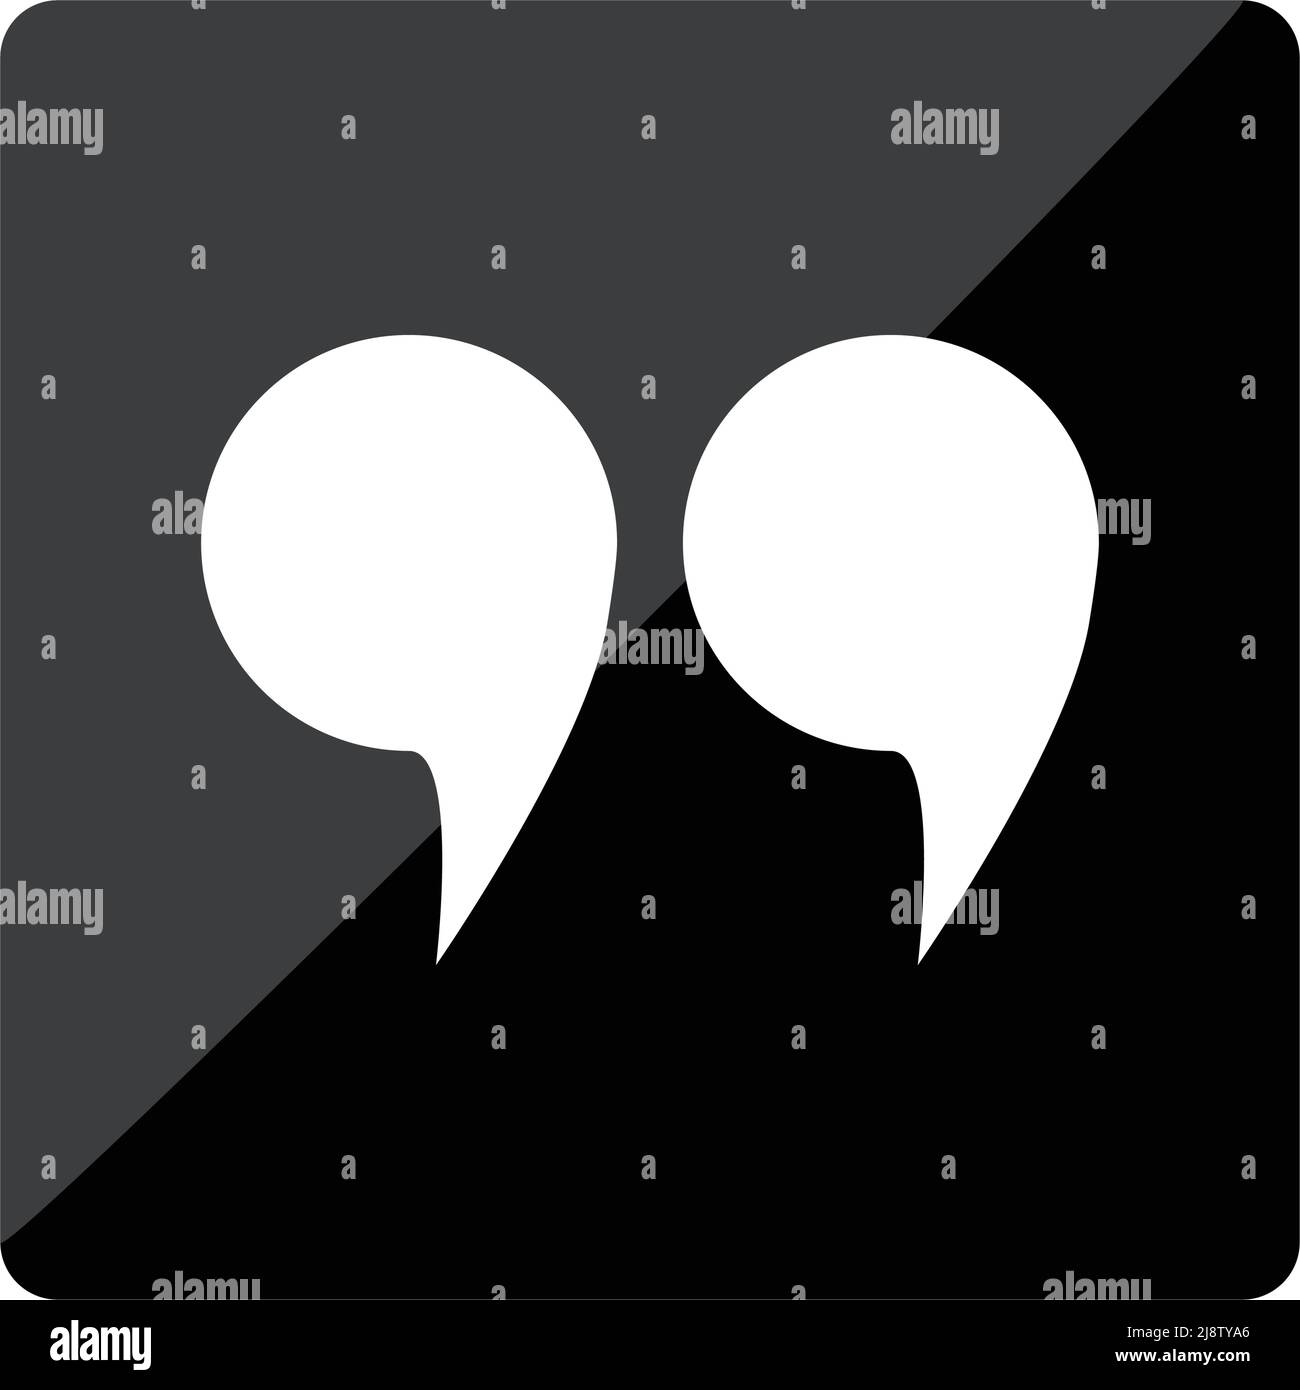 Double quotation icon in glossy black box. Editable vector. Stock Vector